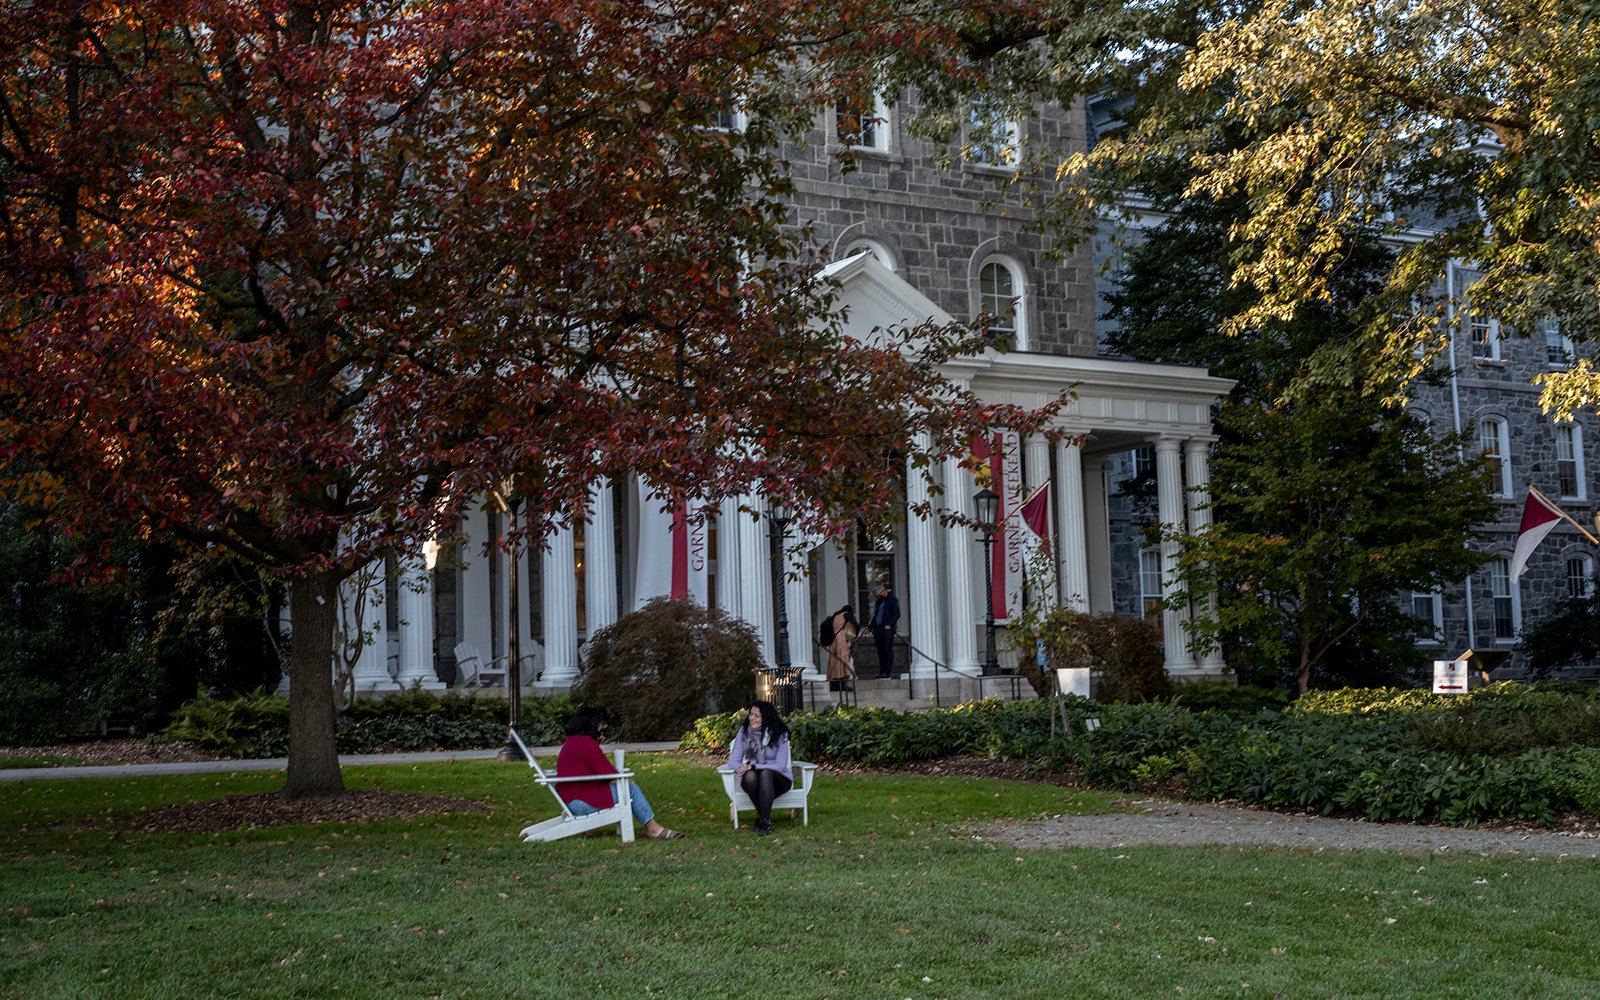 People sit on chairs in front of Parrish Hall